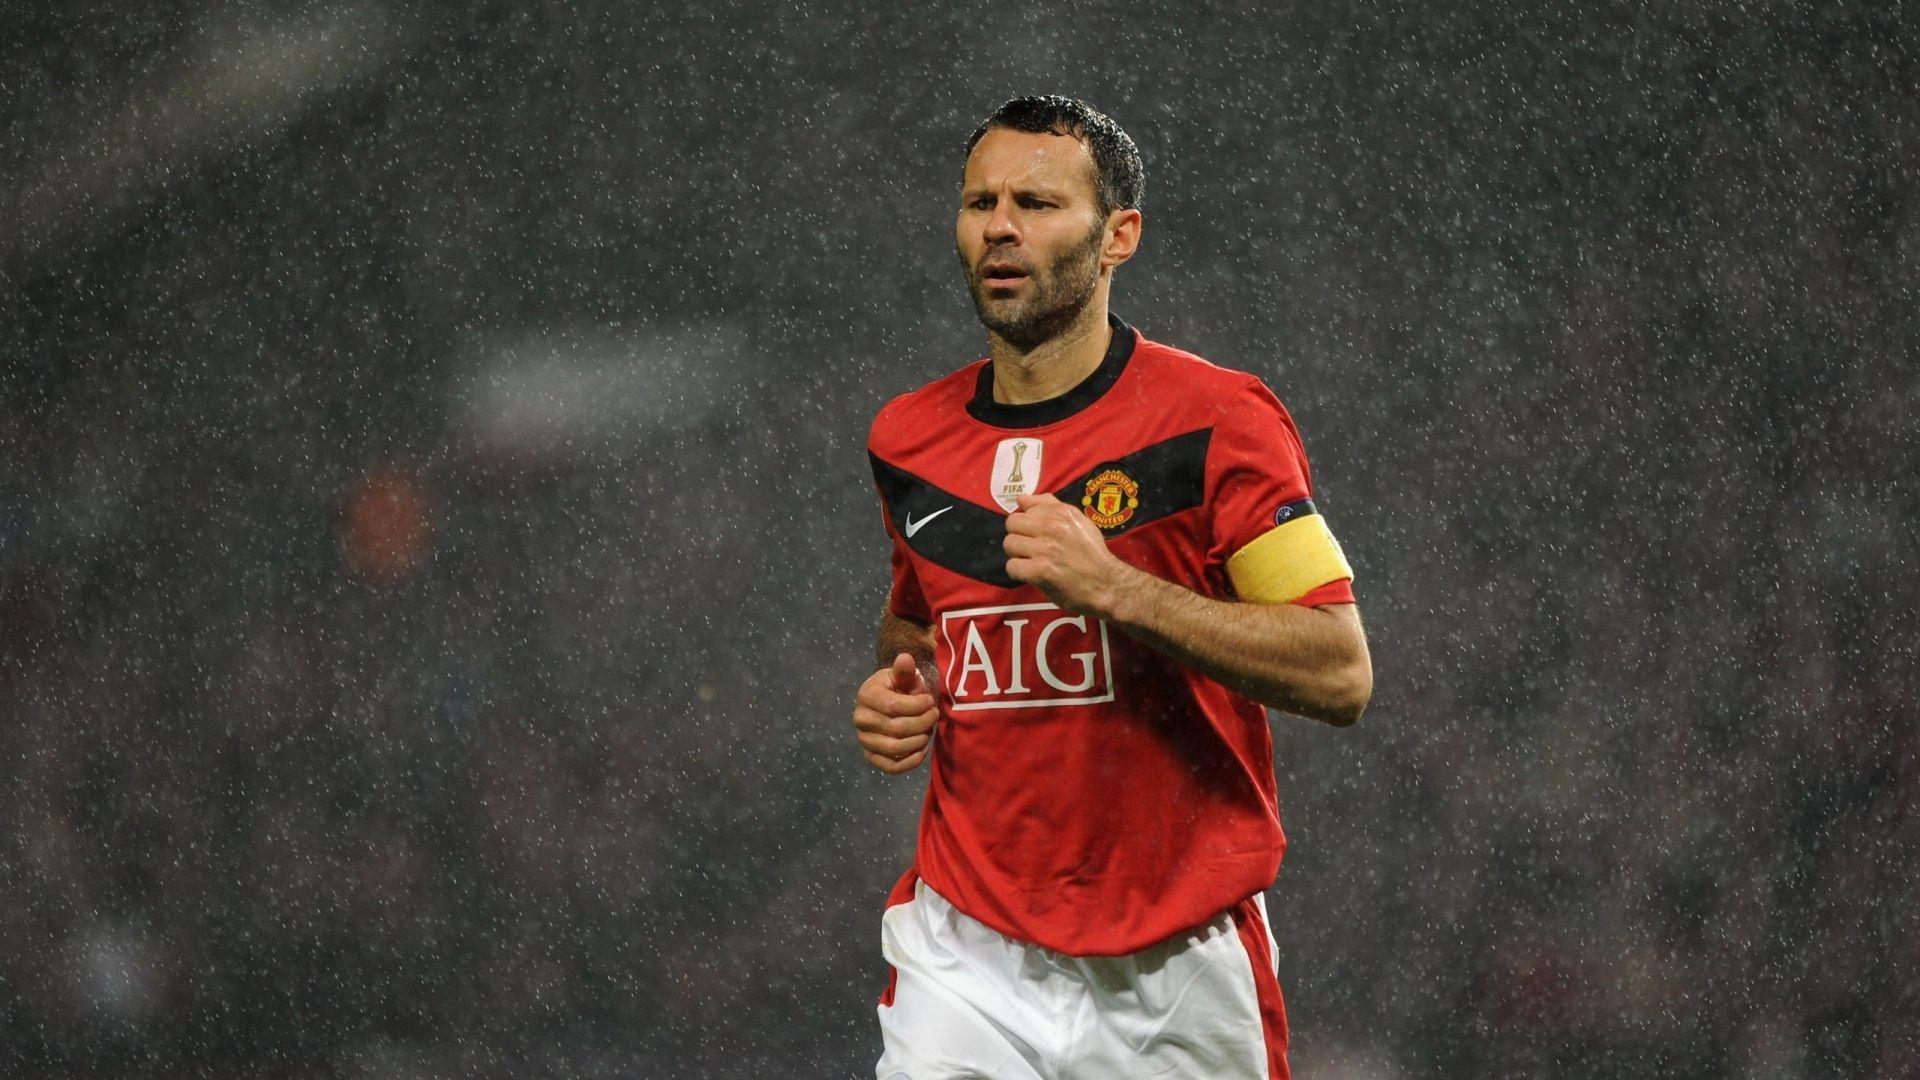 Download Wallpaper 1920x1080 Ryan giggs, Manchester united